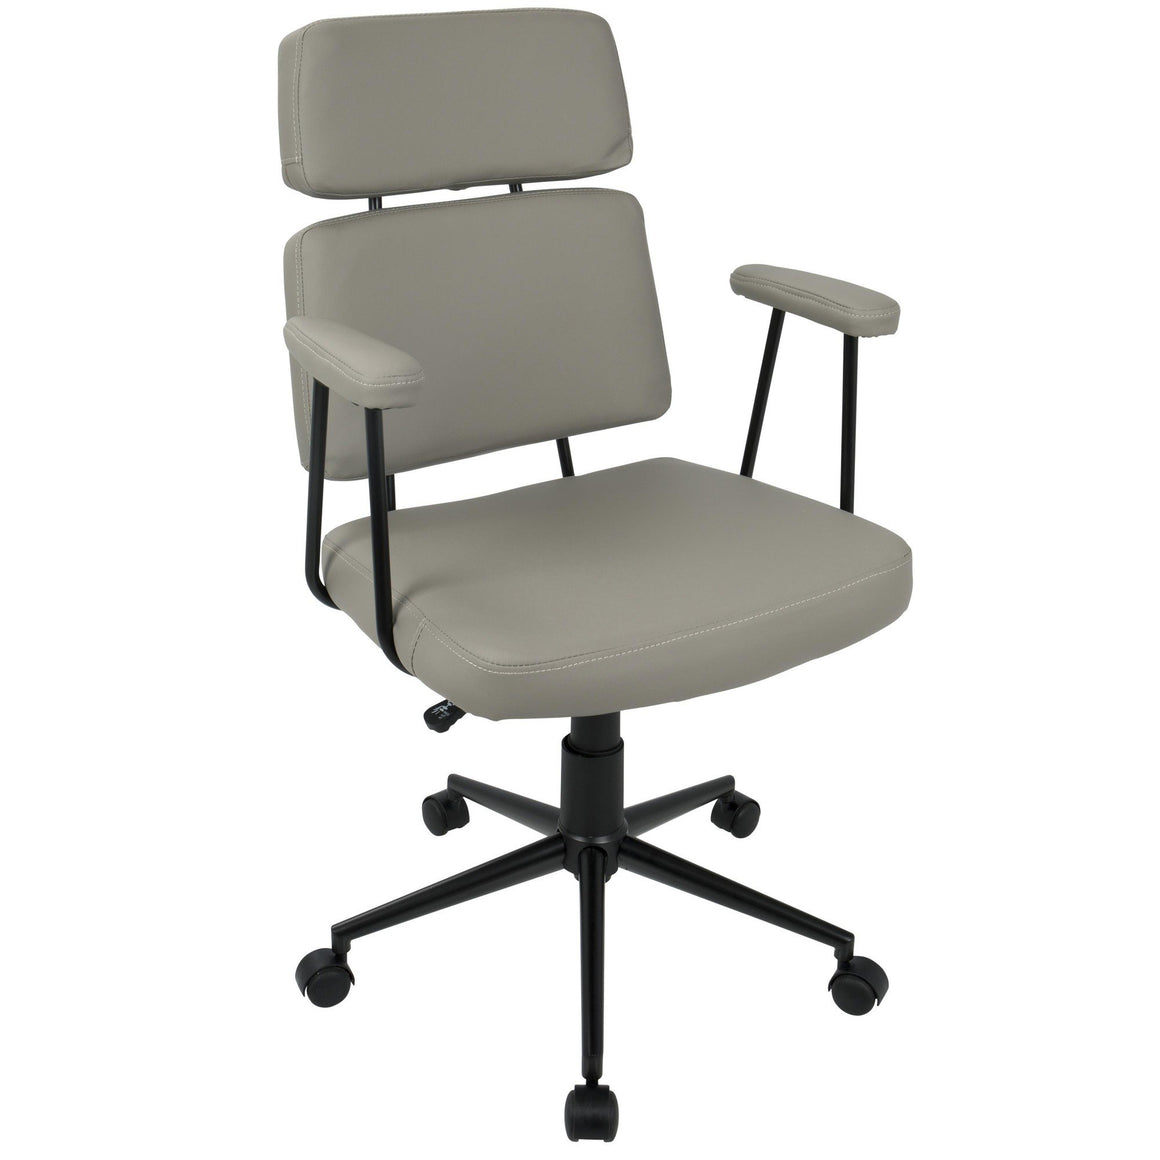 Sigmund Contemporary Adjustable Office Chair in Grey Faux Leather by LumiSource